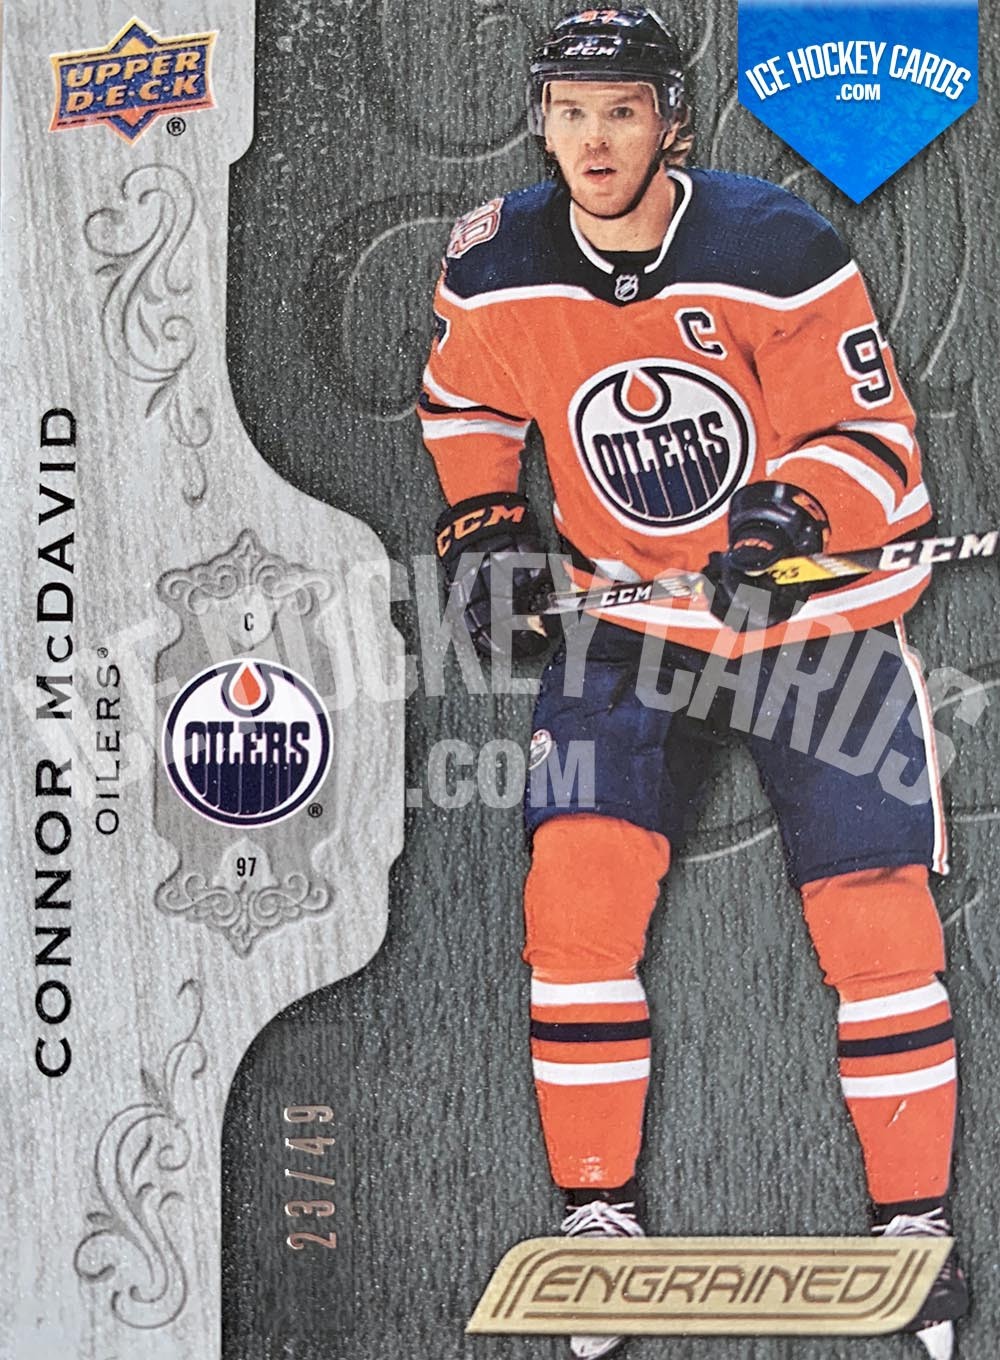 Upper Deck - Engrained 2018-19 - Connor McDavid Base Card # to 49